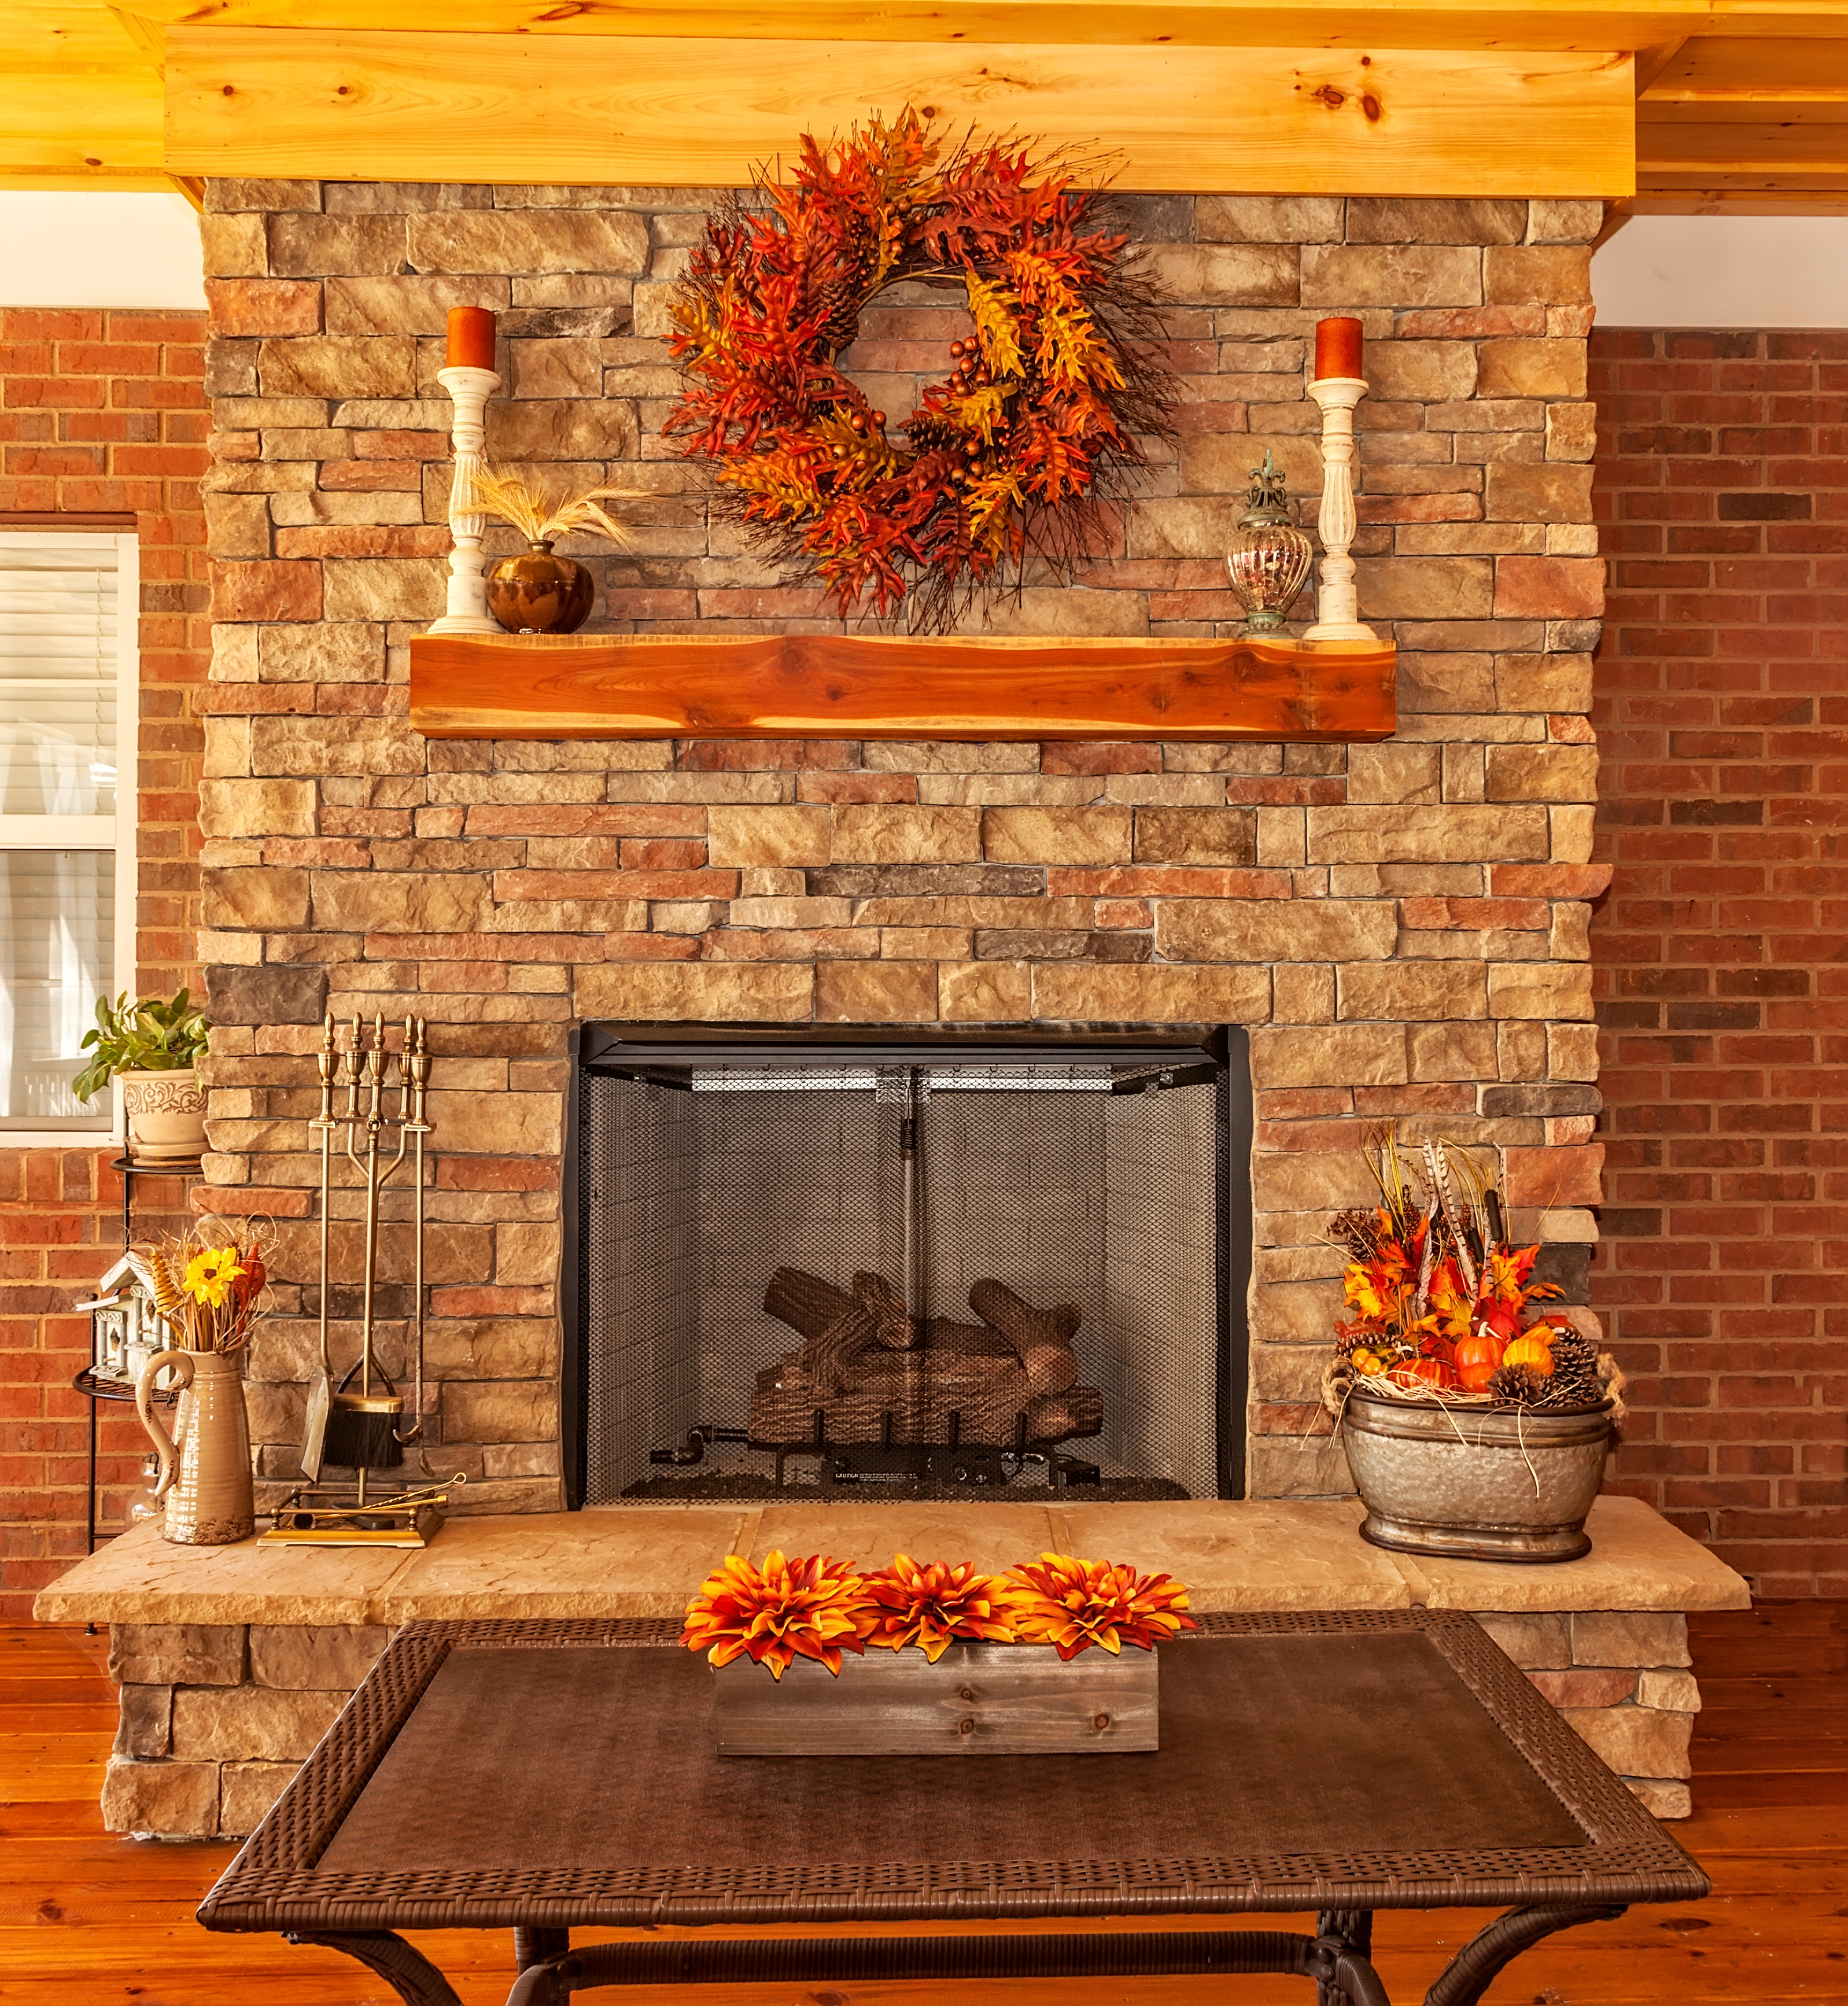 5 Fall Mantel Decorating Ideas That'll Make You Look Like a Pro 137